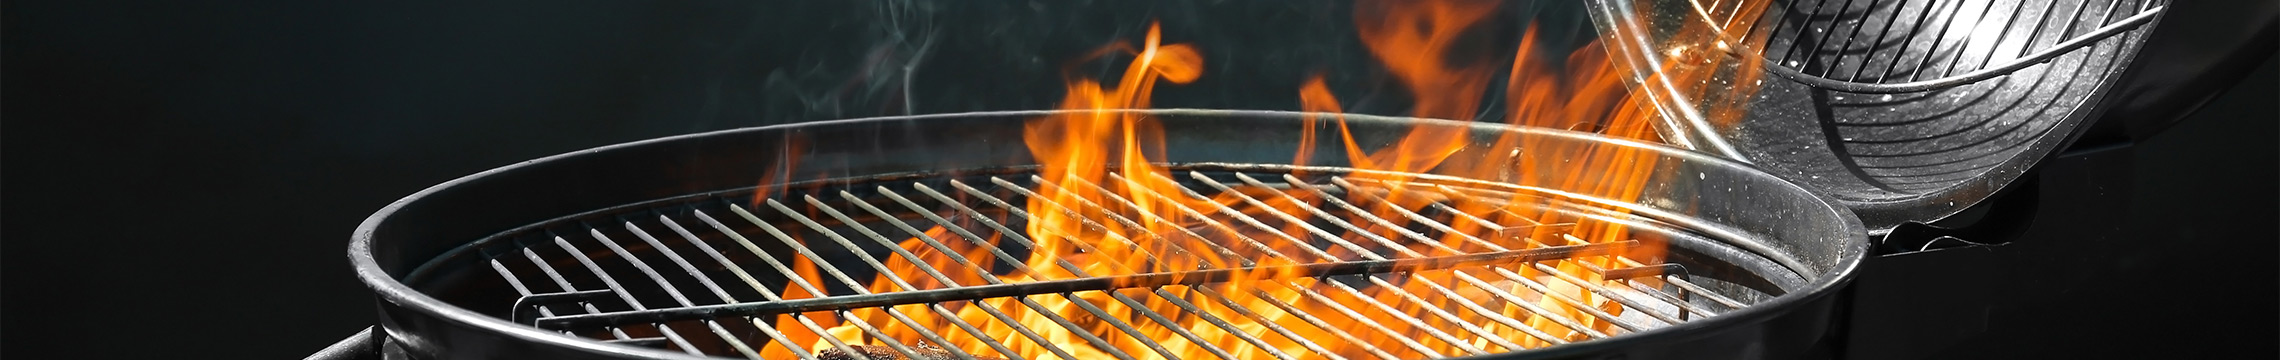 Black kettle barbecue with flames rising from the grill